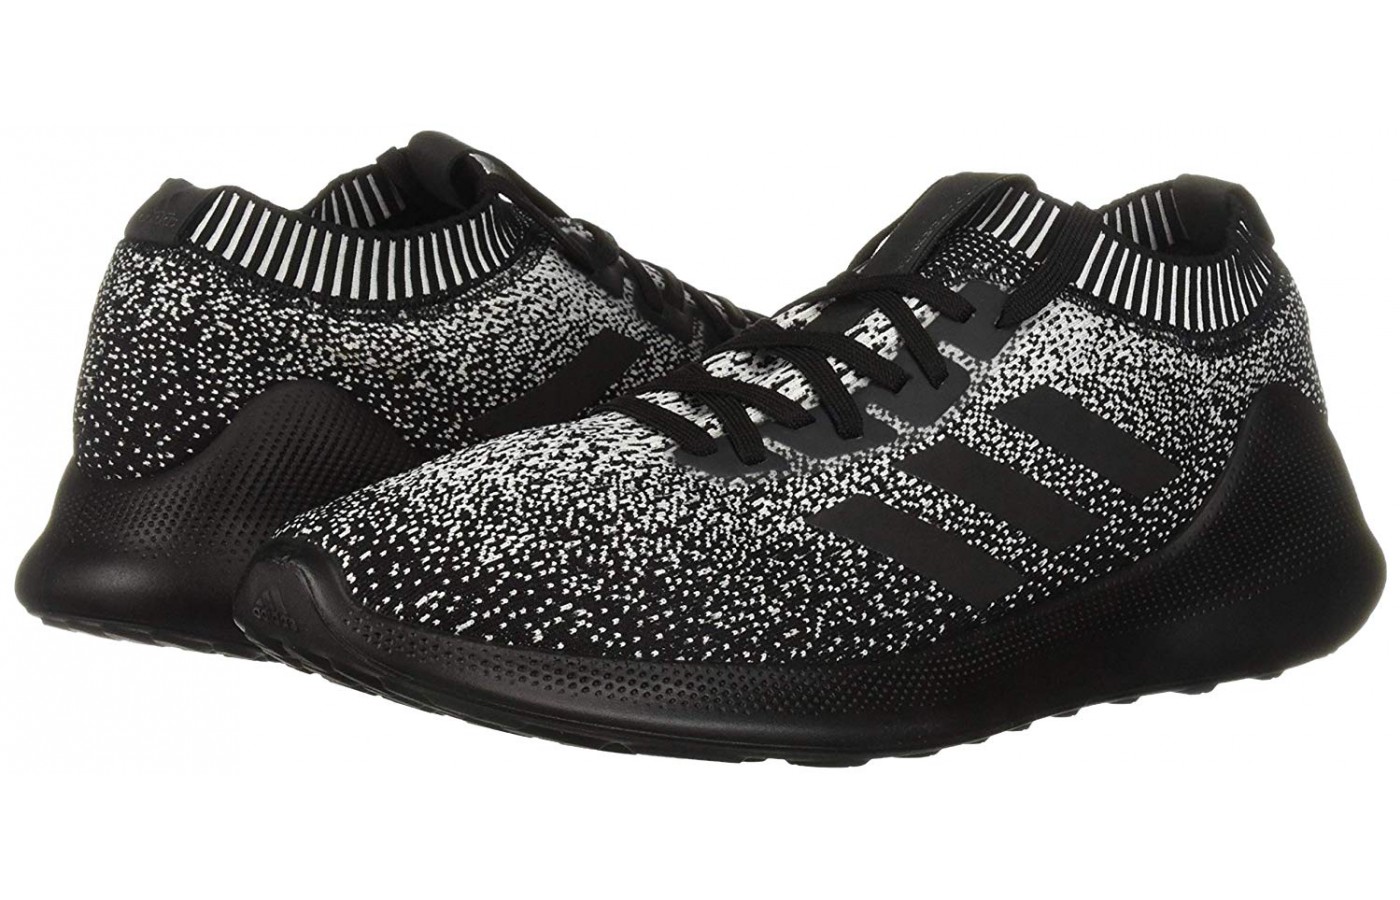 Adidas Purebounce+ is the perfect shoe for running on the city streets